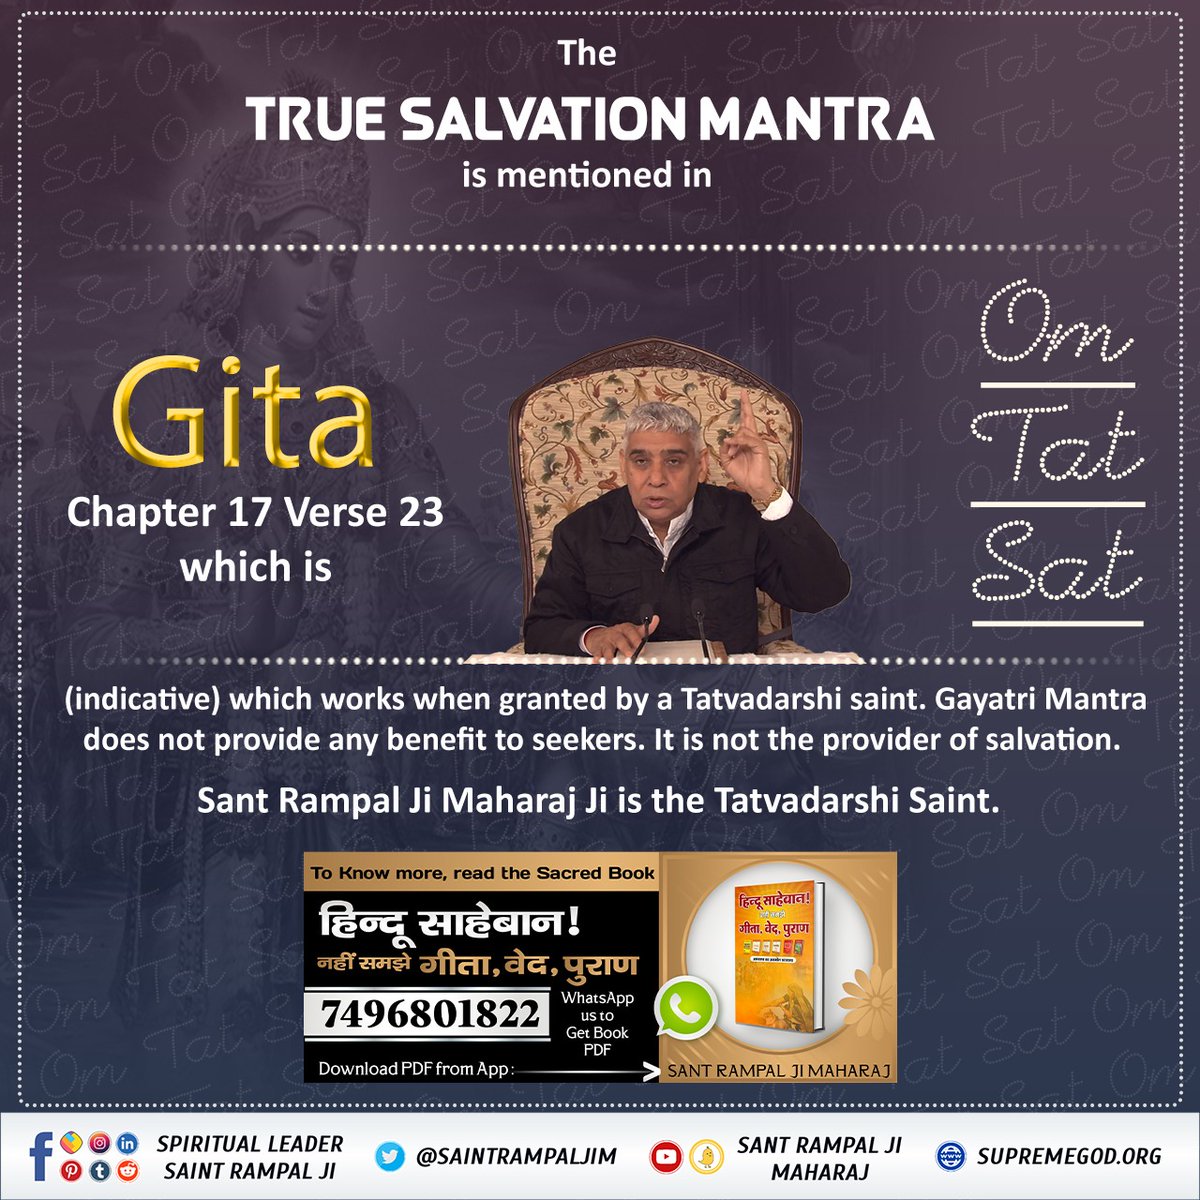 #ये_है_गीता_का_ज्ञान In Holy Gita Ji Chapter 17 Verse 23 that the Mantras of Salvation is OM-TAT-SAT (indicative) which works only when granted by Tattvadarshi Sant Rampal Ji. Gayatri Mantra does not provide any benefit to seekers.